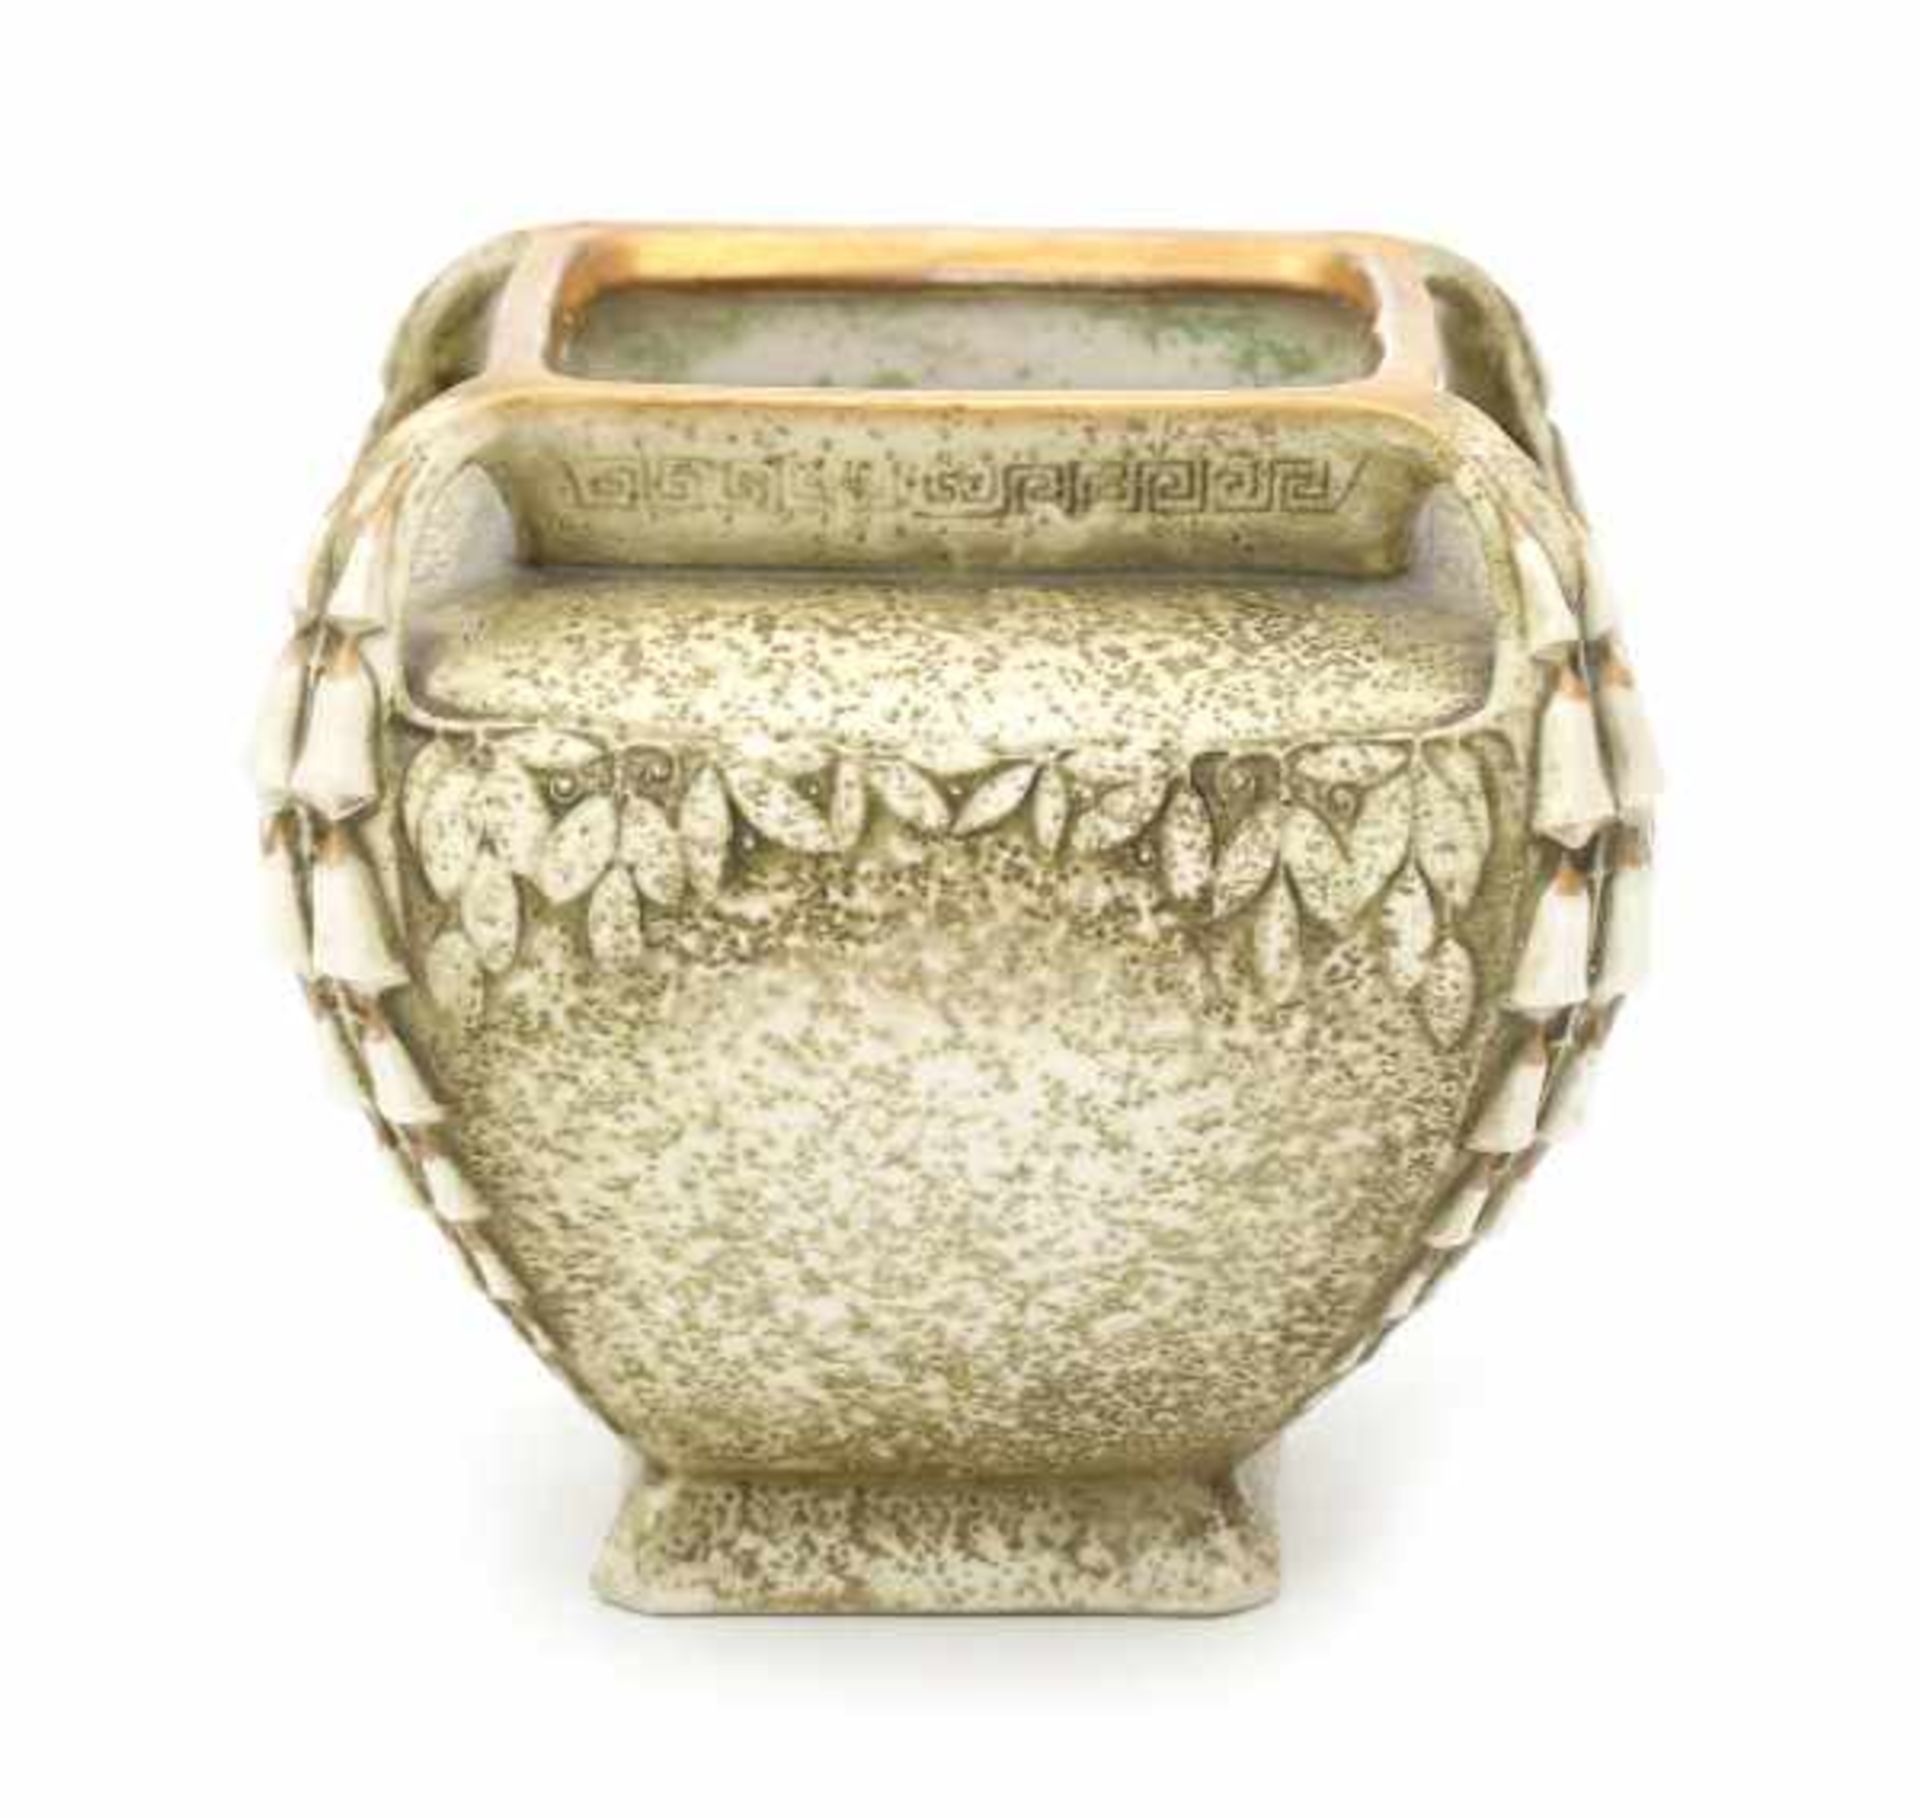 Porzellanfabrik Ernst Wahliss, ViennaA moulded ceramic vase with square section base and top rim